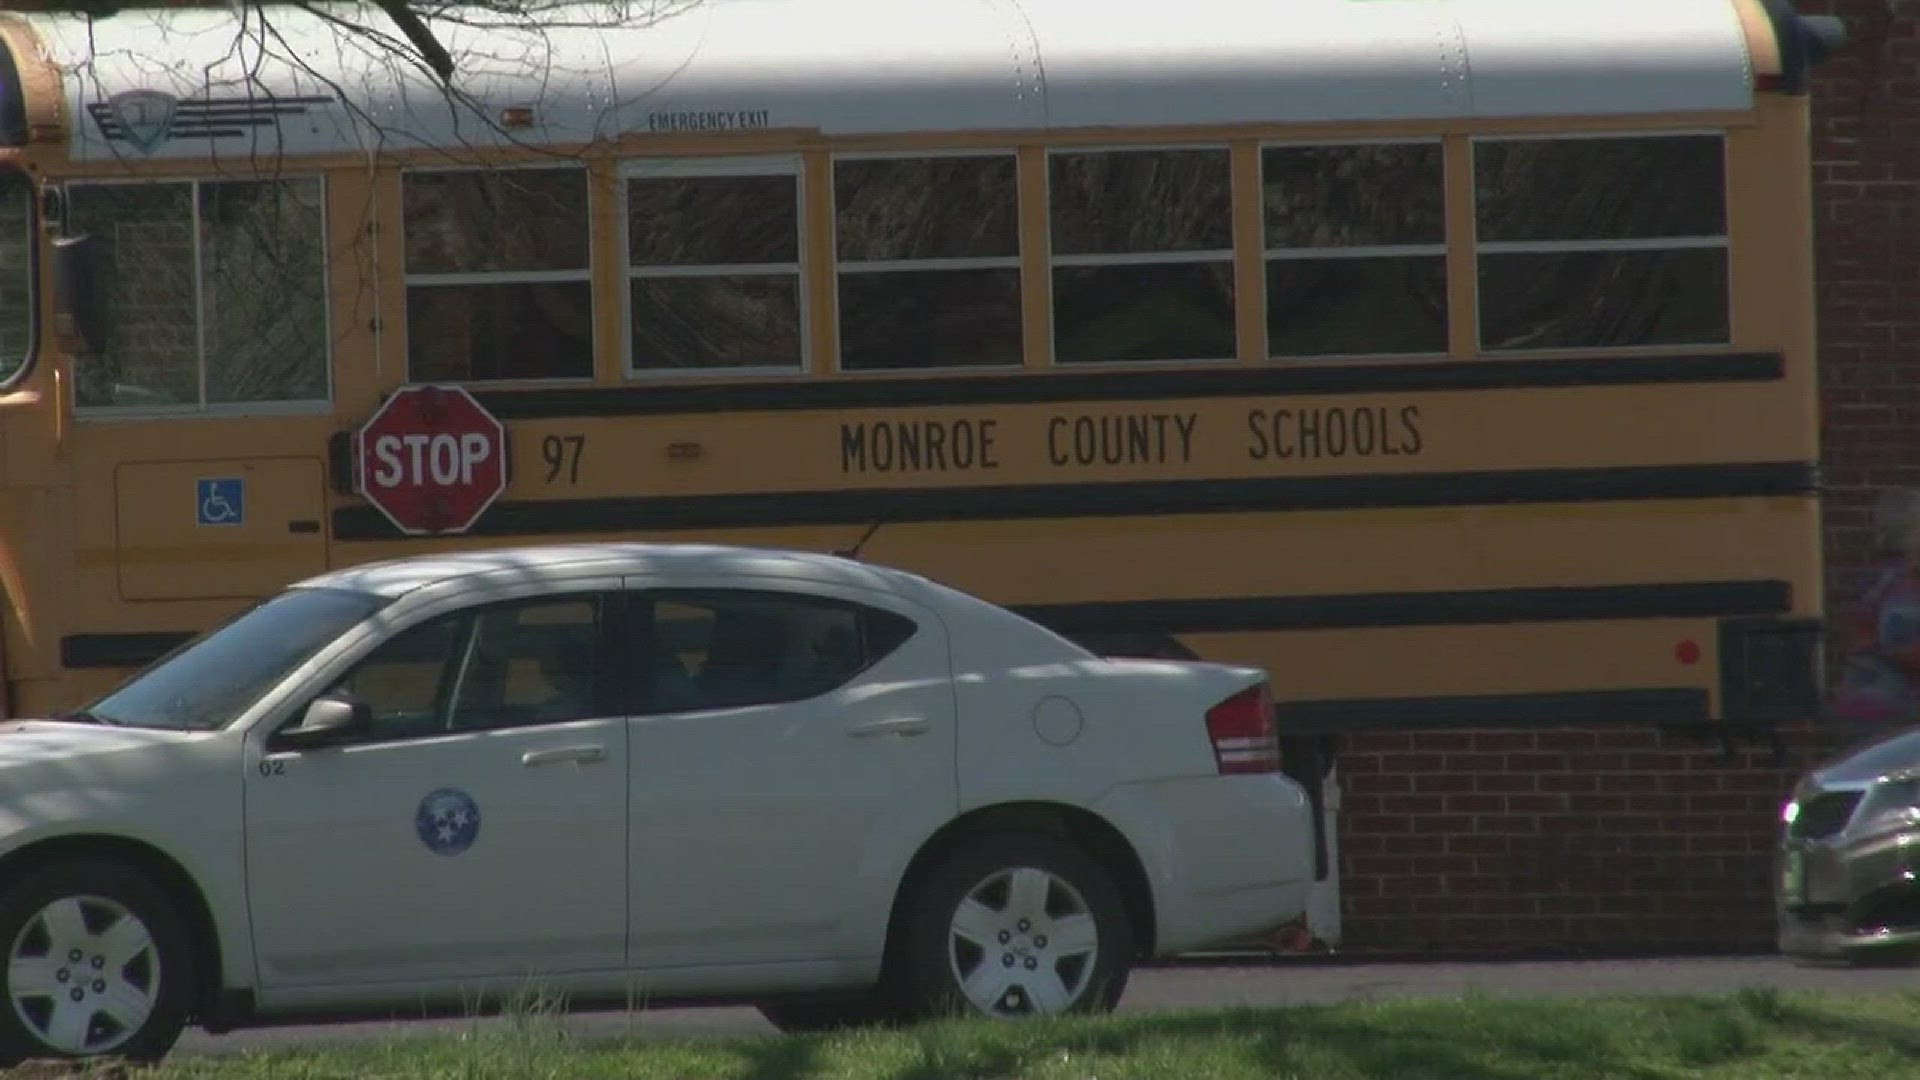 March 6, 2018: Monroe County Sheriff's Office deputies are increasing their presence in the county's schools and leaders look to boost school security.